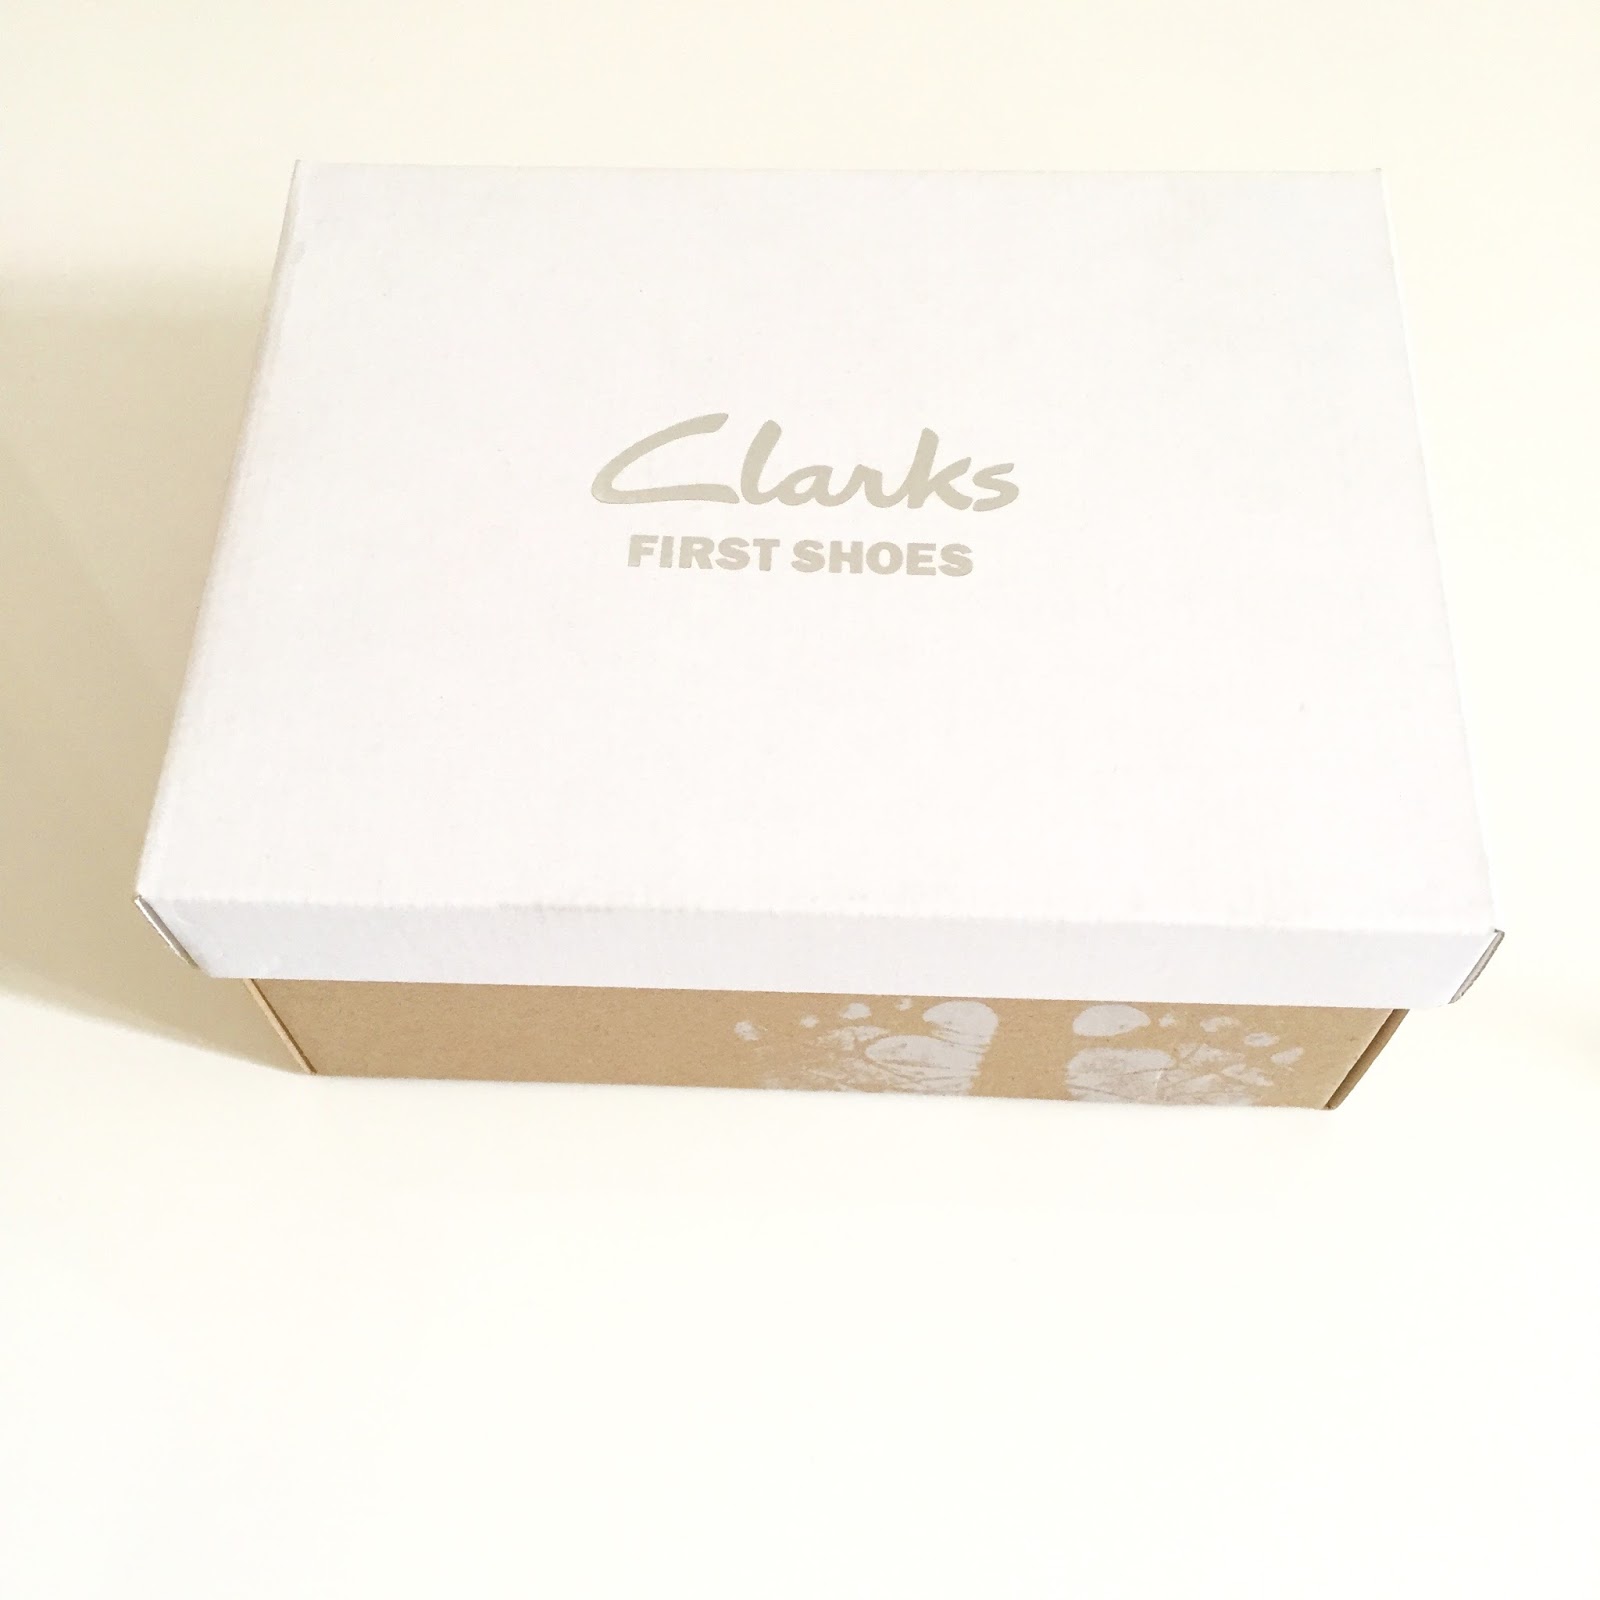 my first shoes clarks